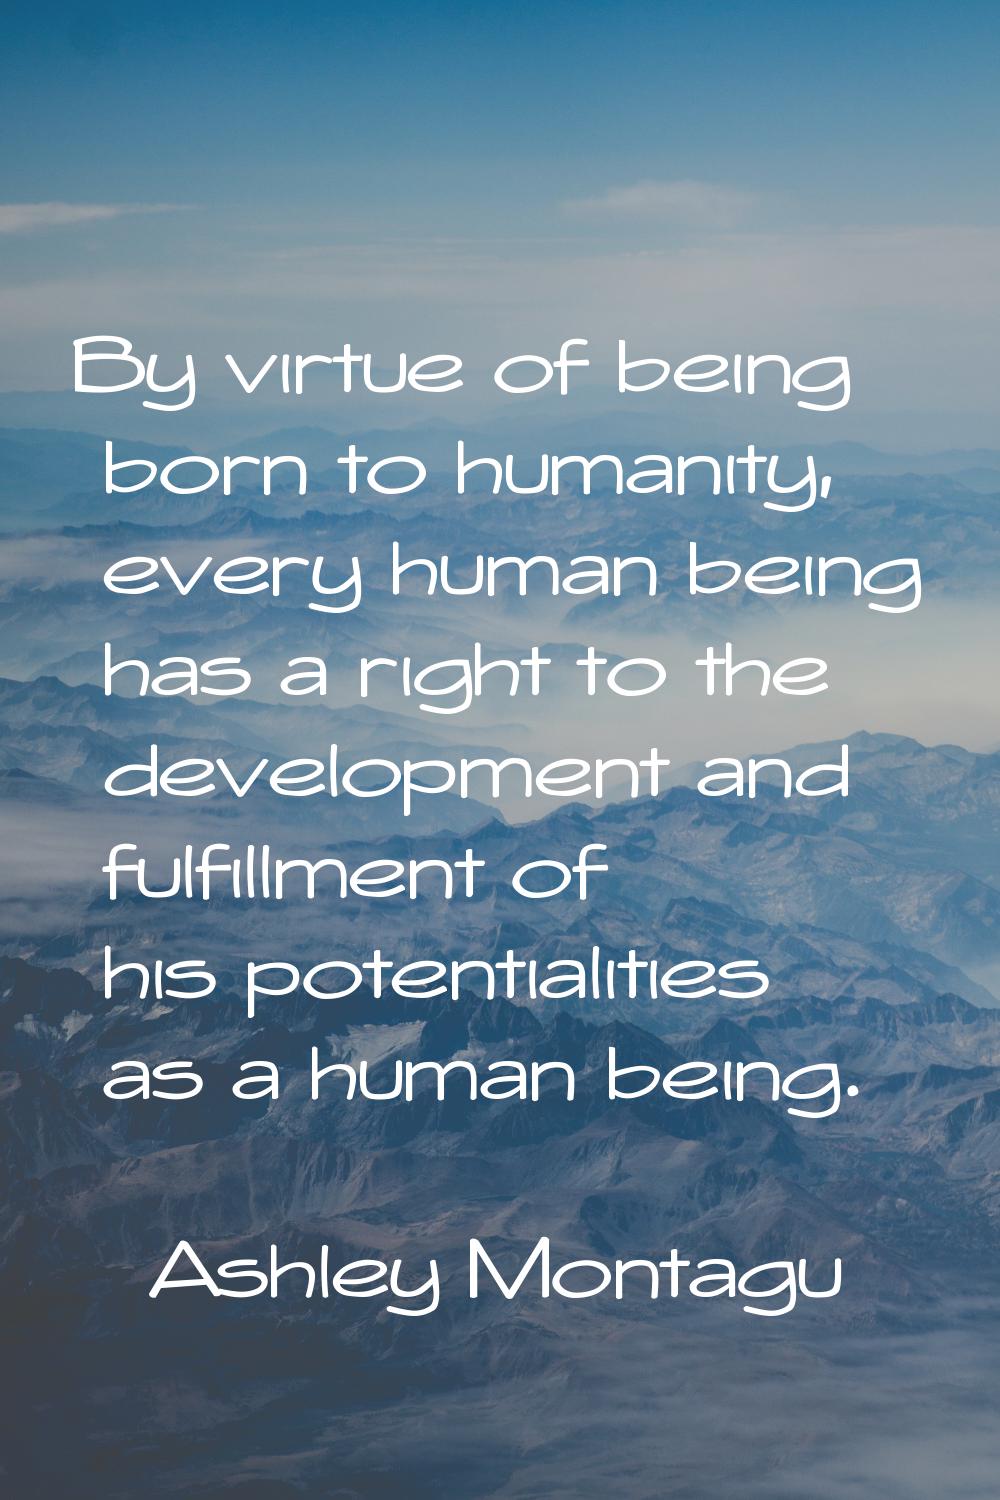 By virtue of being born to humanity, every human being has a right to the development and fulfillme